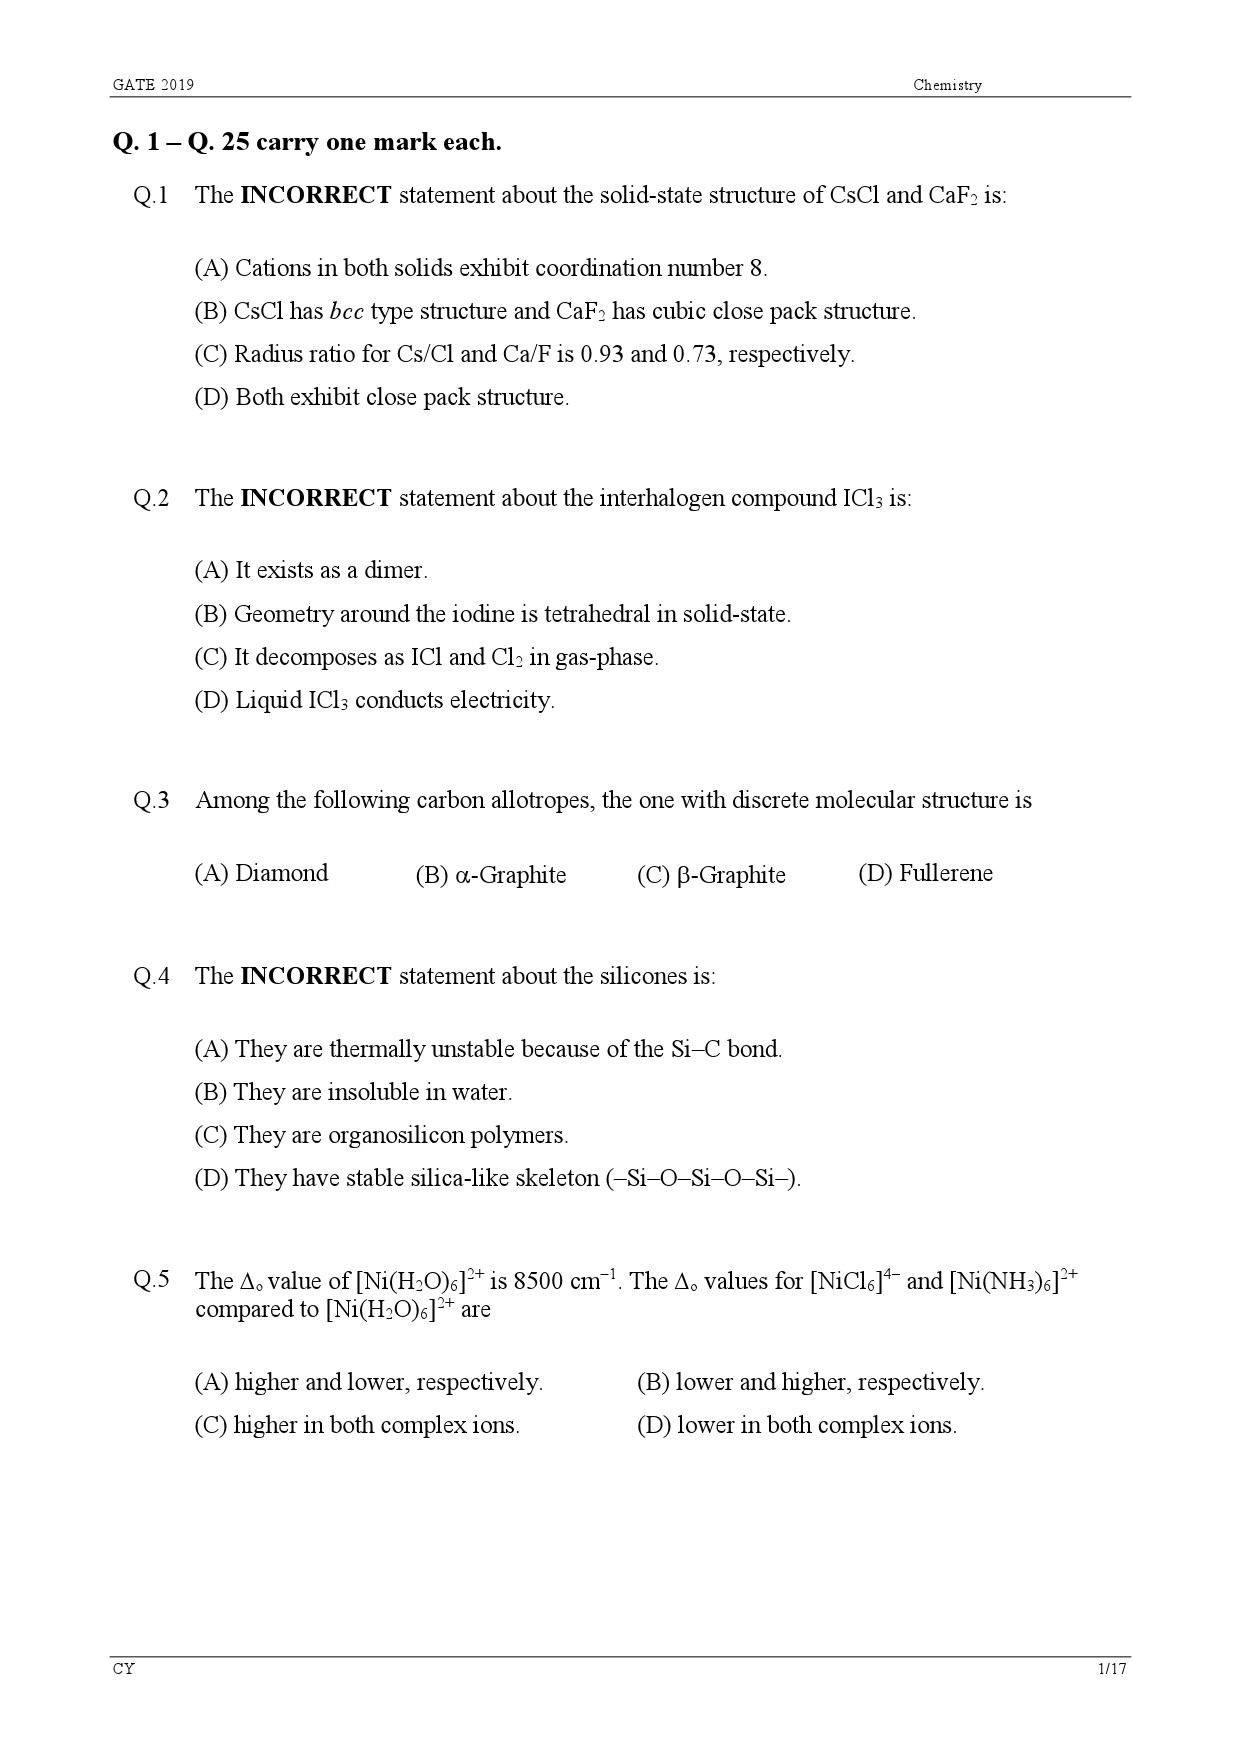 GATE Exam Question Paper 2019 Chemistry 4